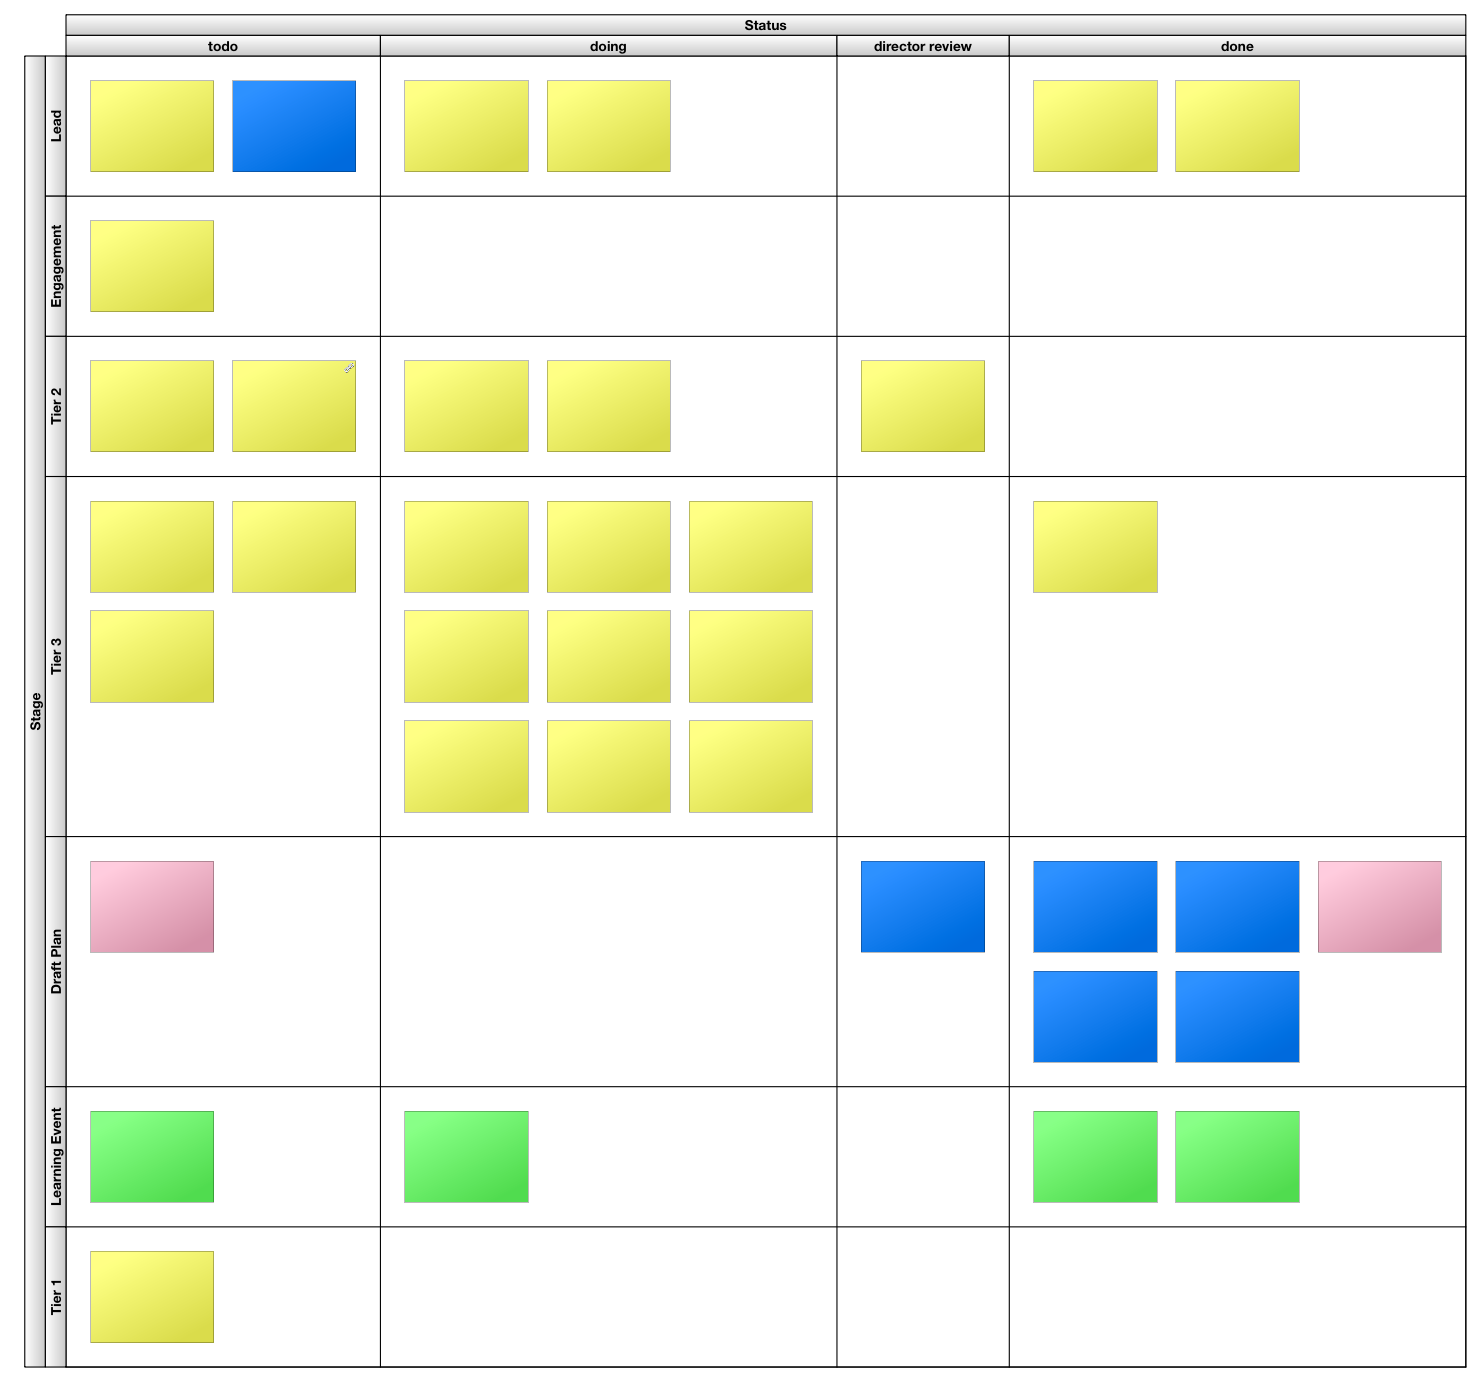 HyperPlan Kanban Board (text on cards has been redacted)